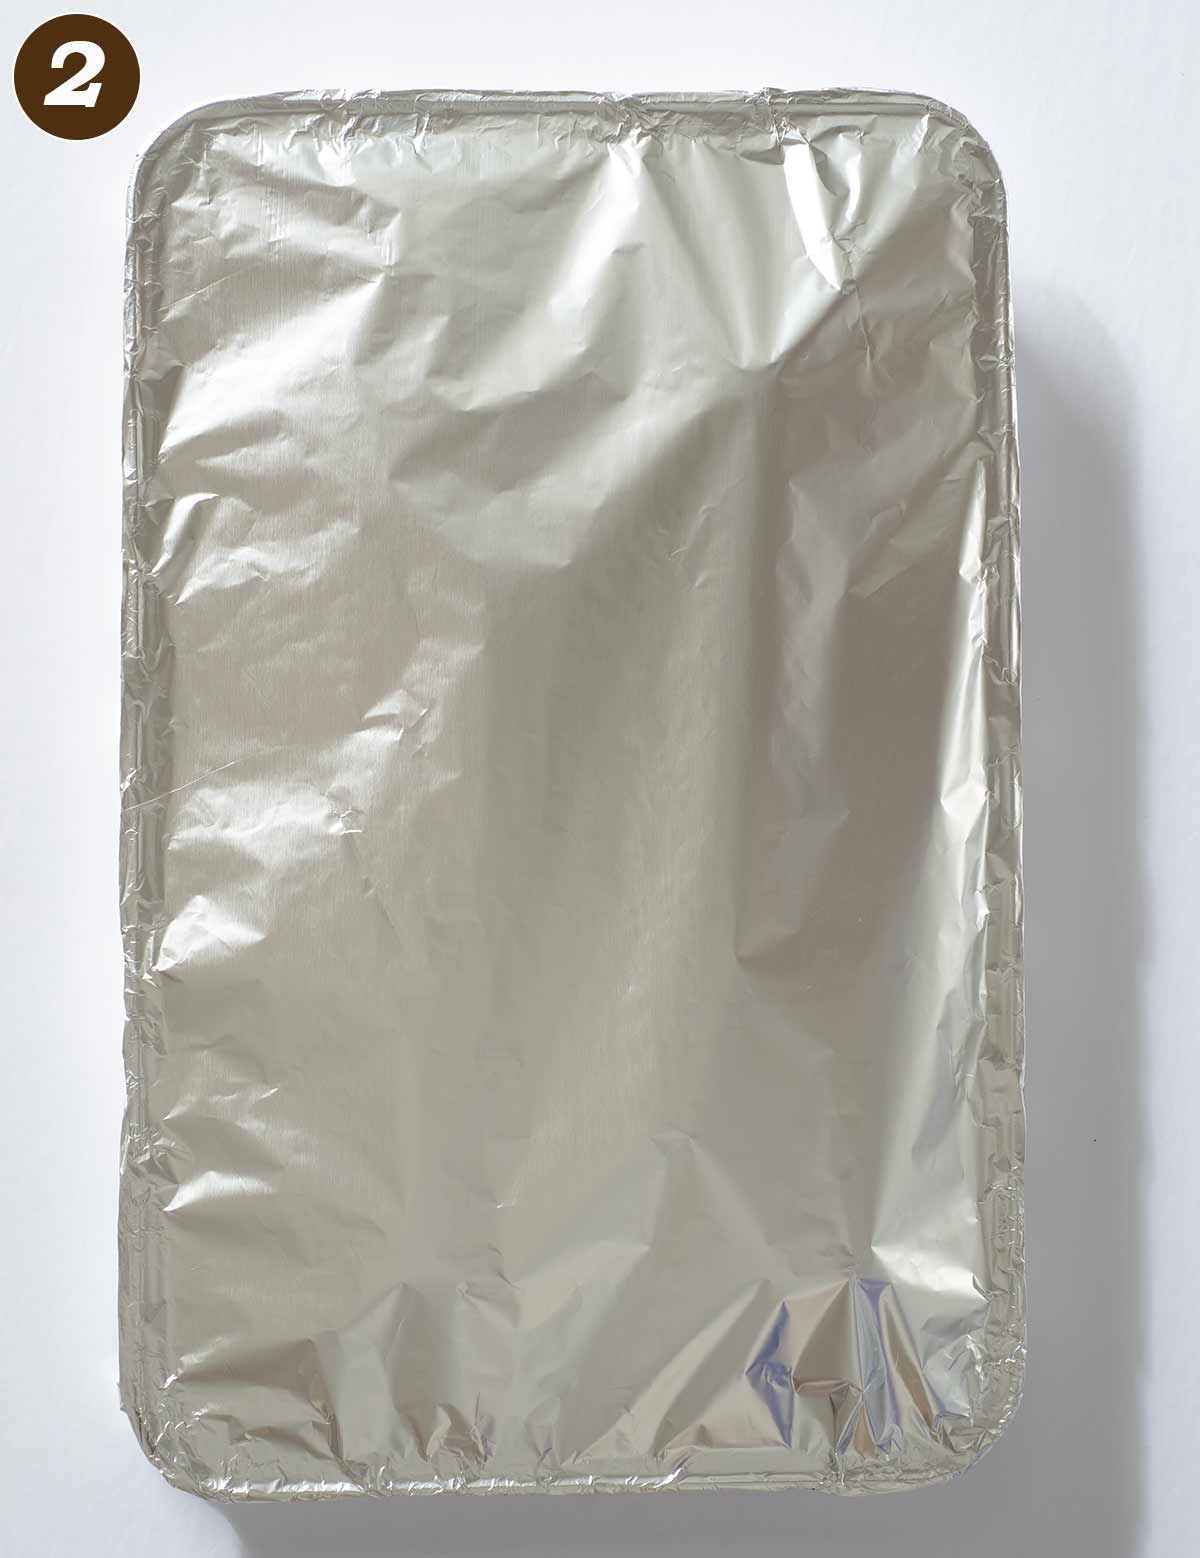 Baking sheet covered with aluminum foil.